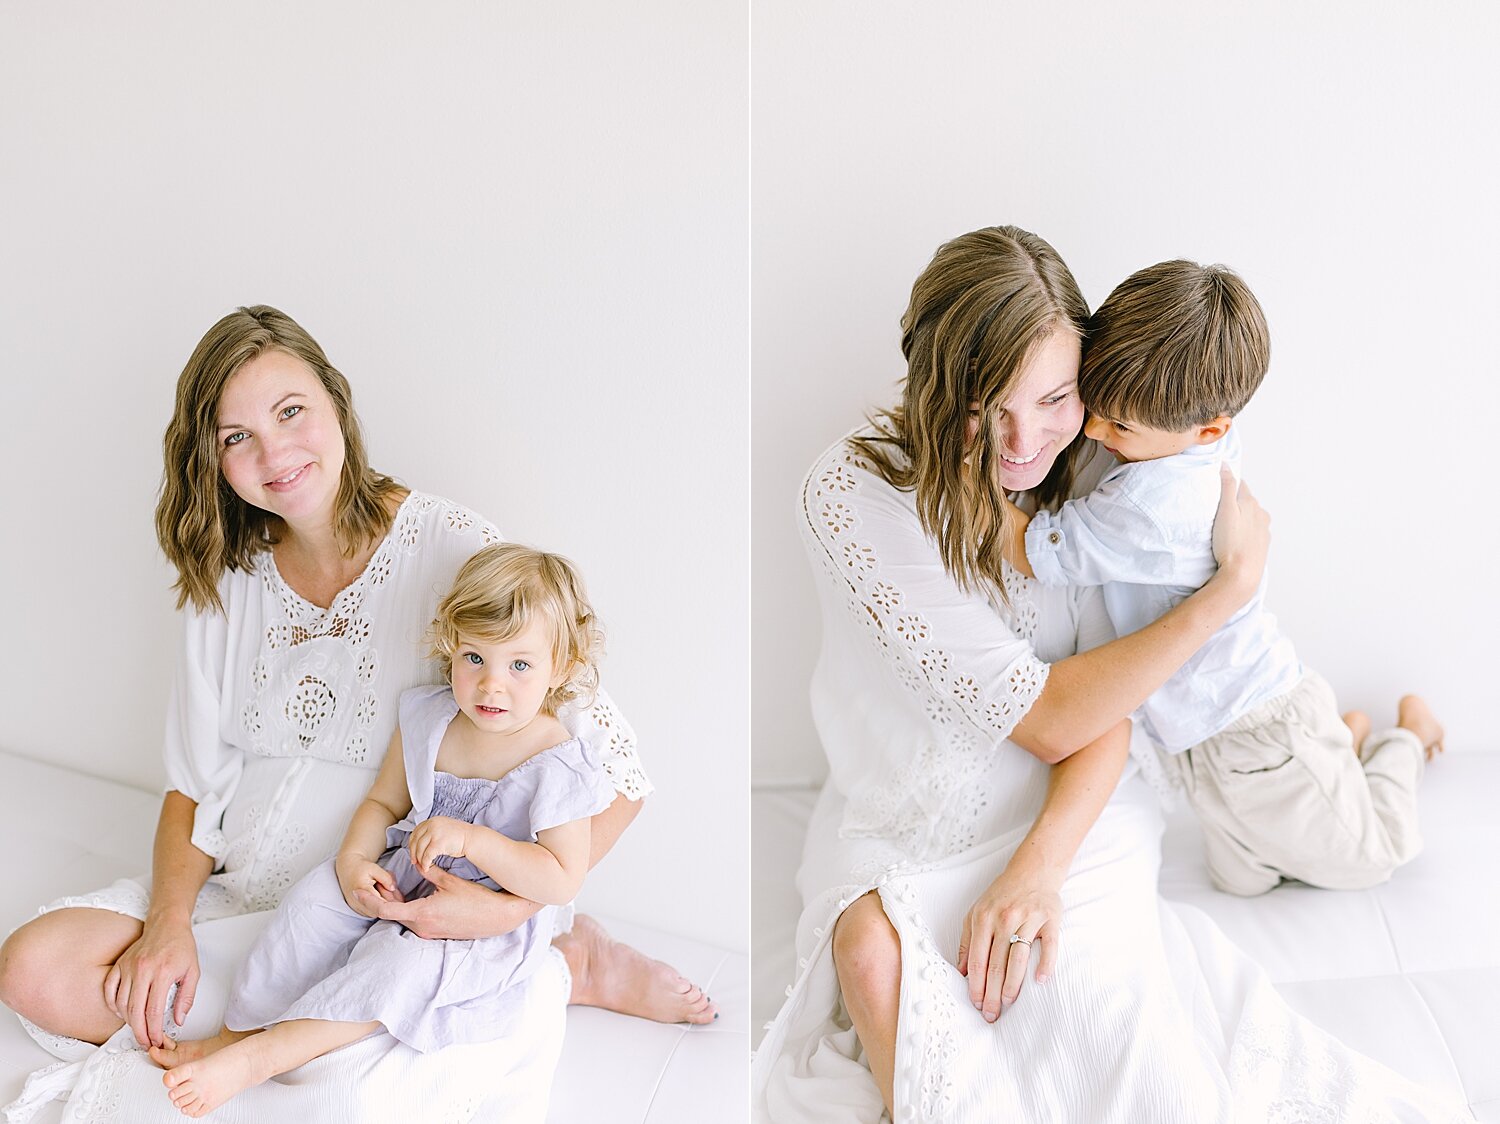 Mom with her son and daughter | Ambre Williams Photography